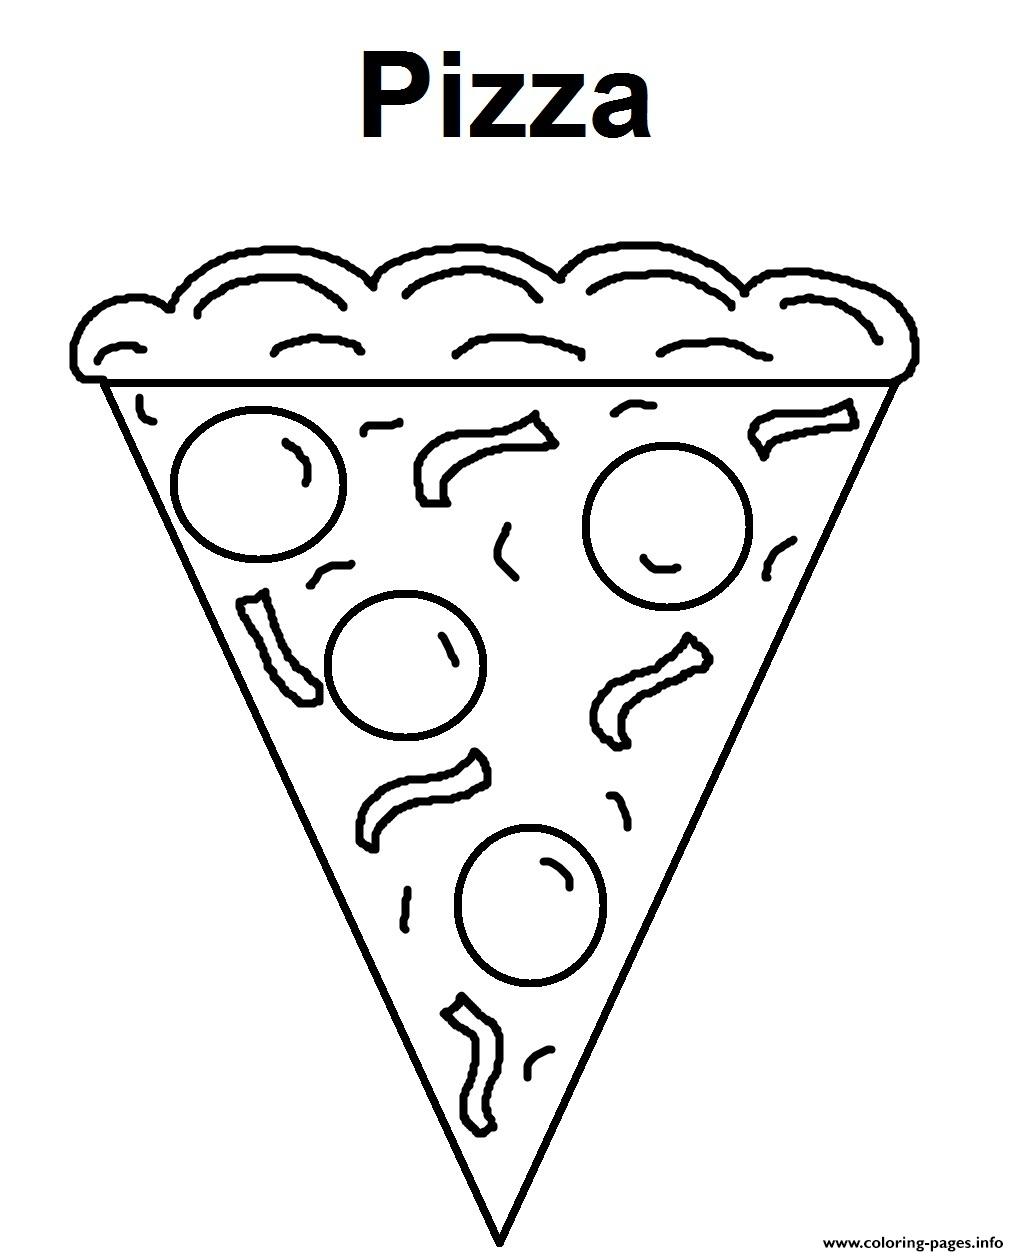 Pizza S Of Food For Kids6469 coloring